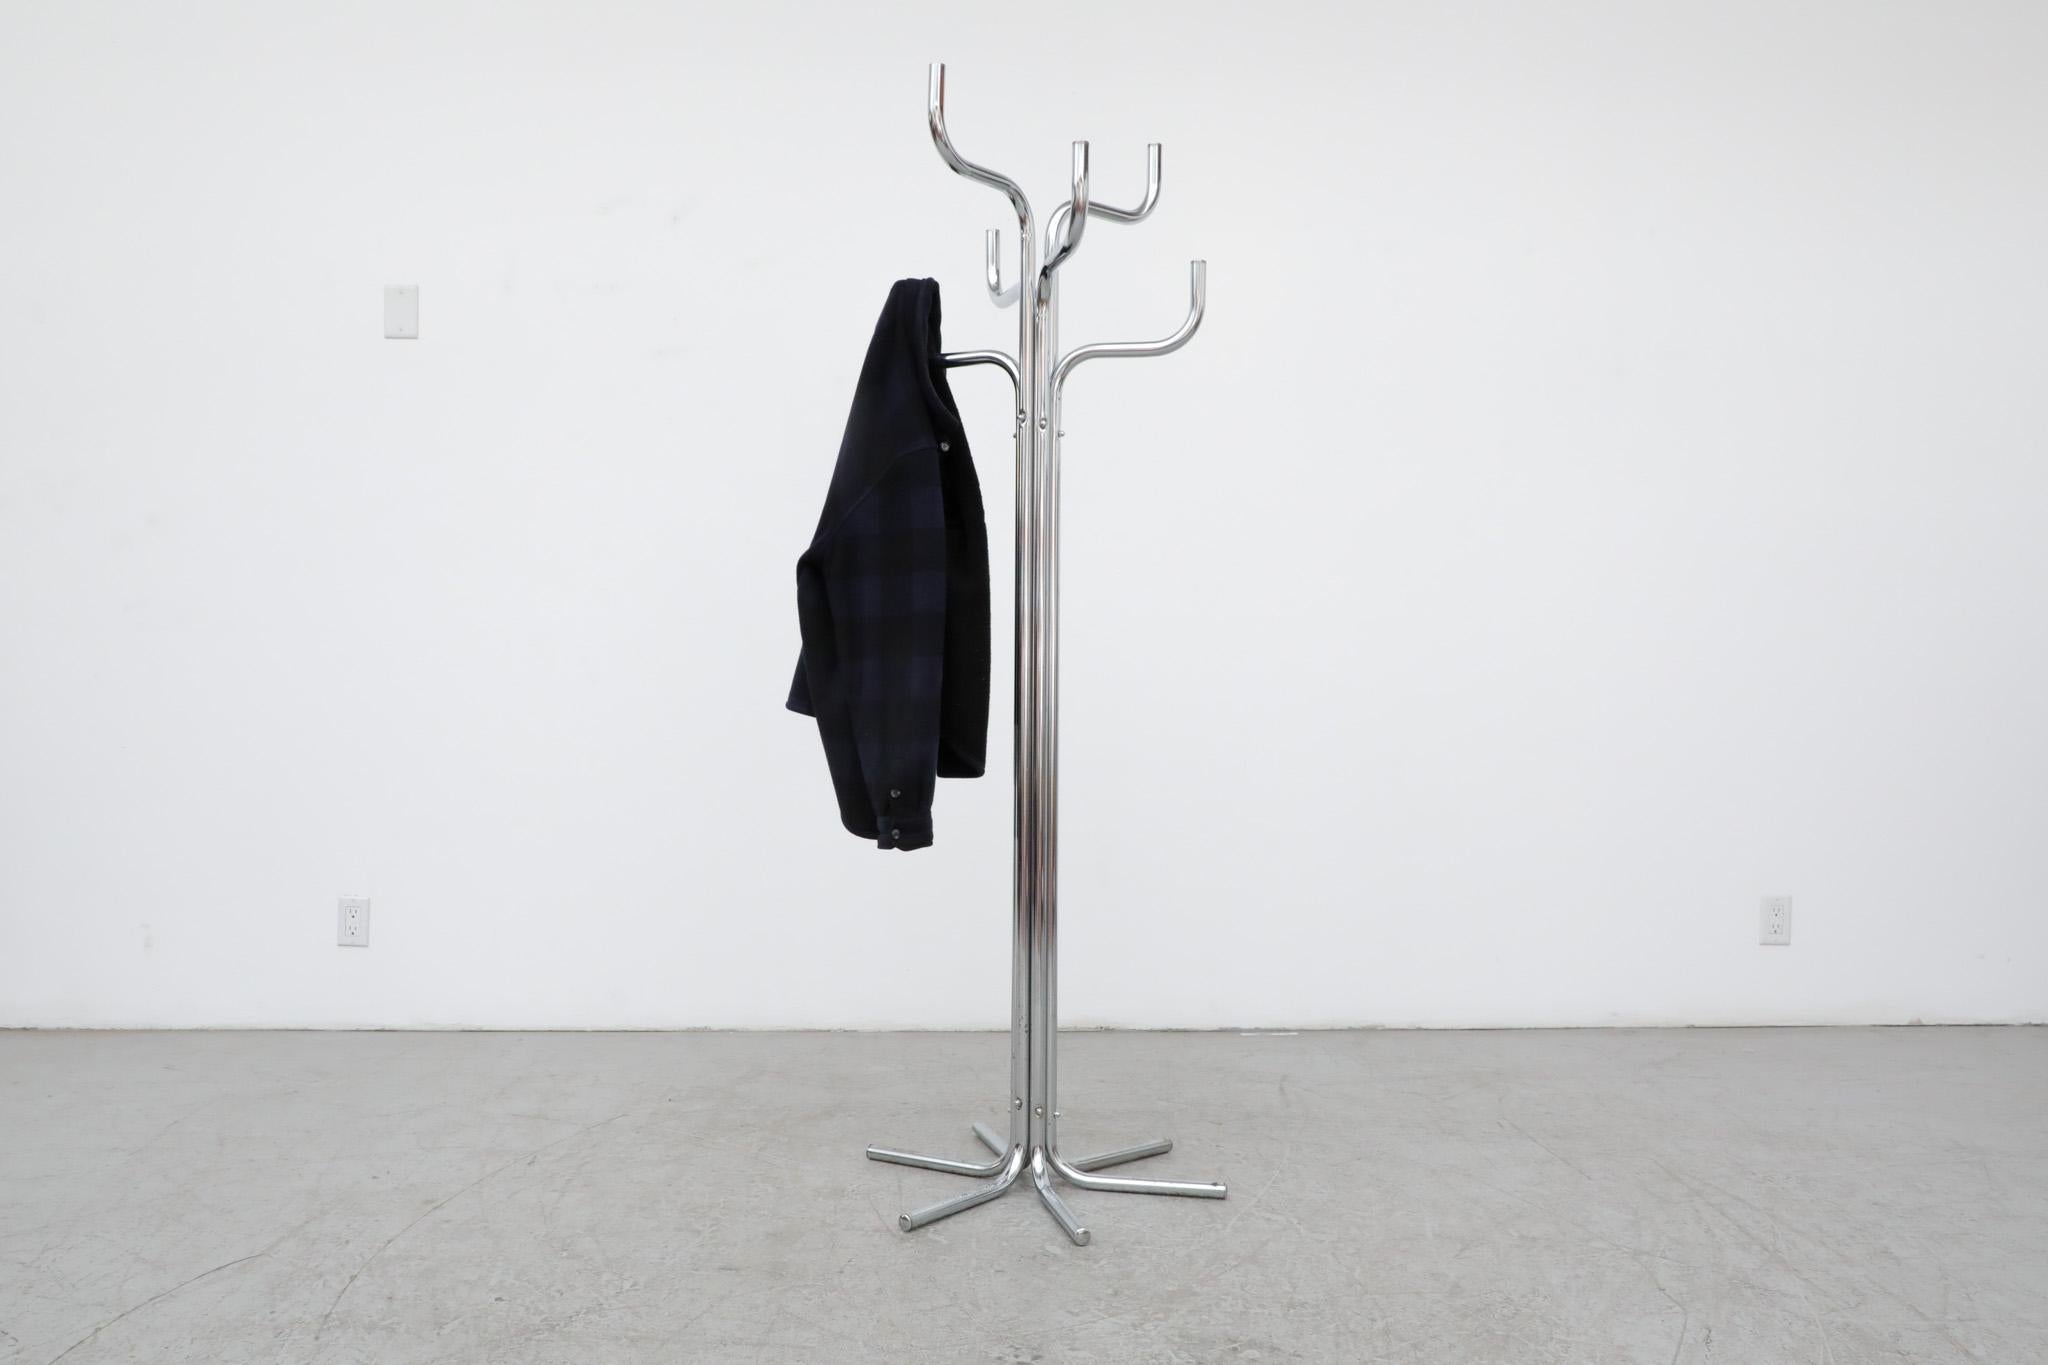 Gorgeous, Mid-Century, 1970's, Sidse Werner style chrome tube 'coat tree' coat rack. Dynamic design and practical functionality highlighted by 8 bent steel tubes. Piece is in original condition with some visible wear and patina. all consistent with